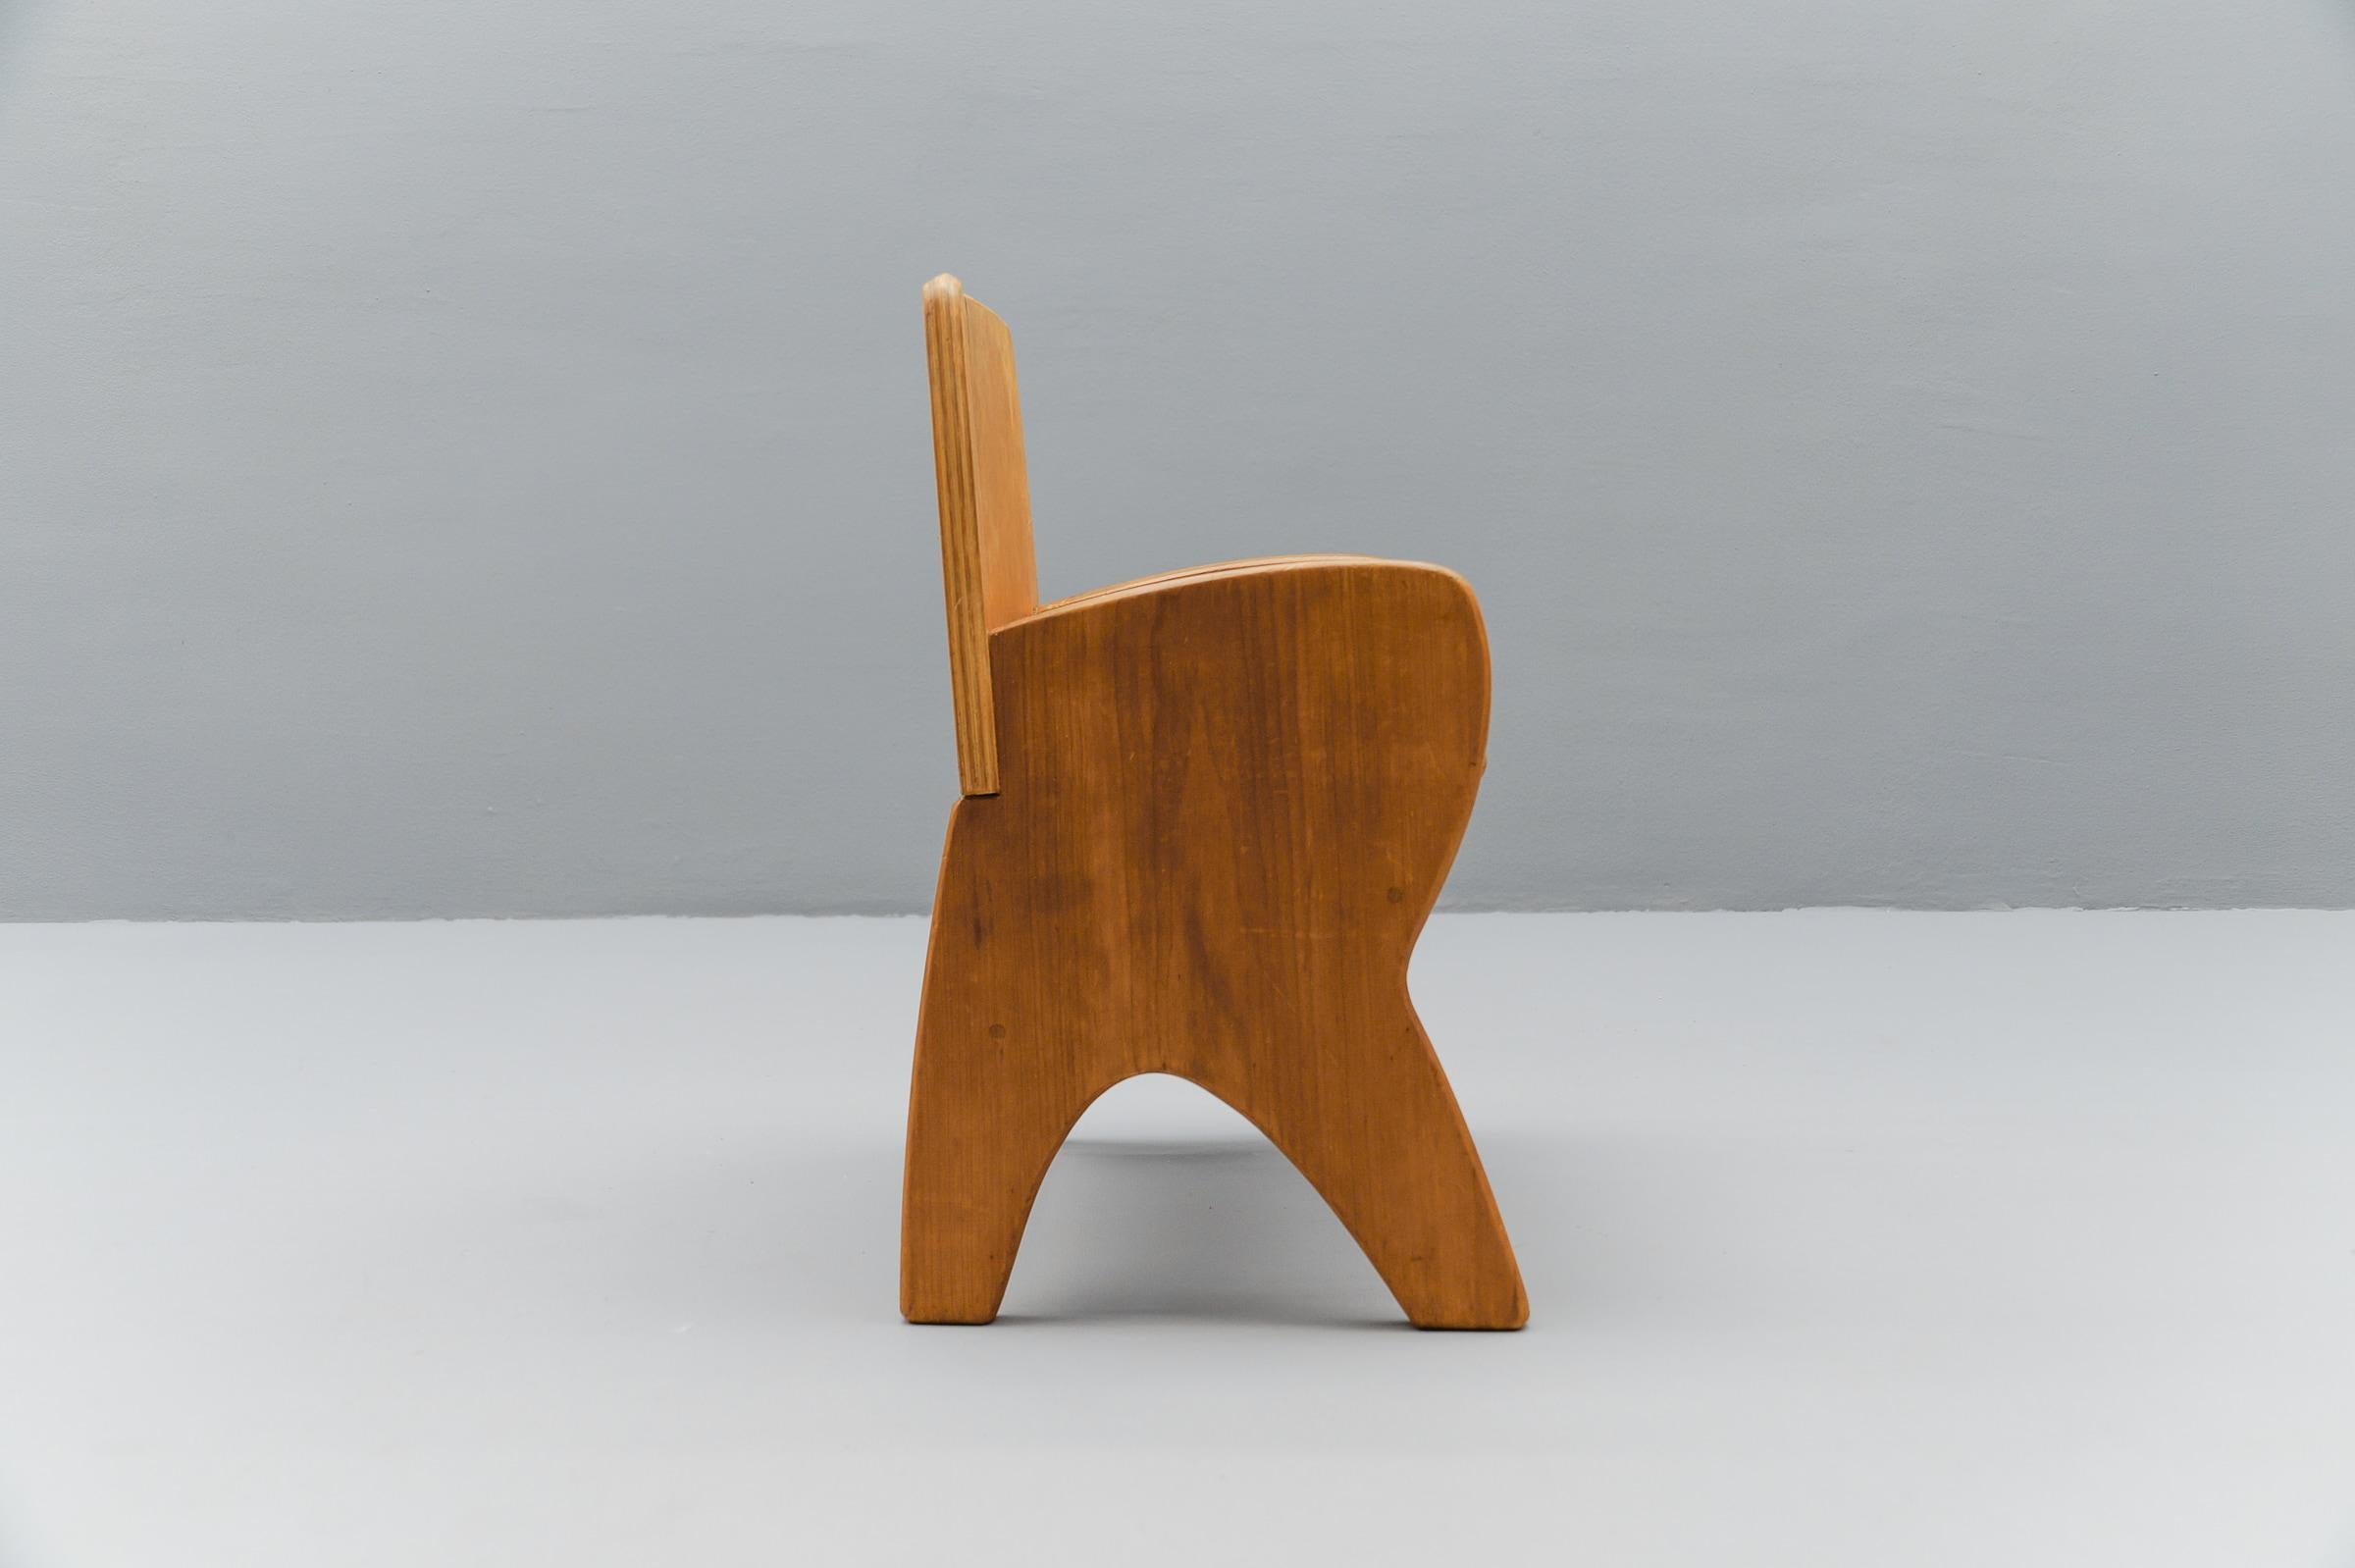 small wooden childs chair